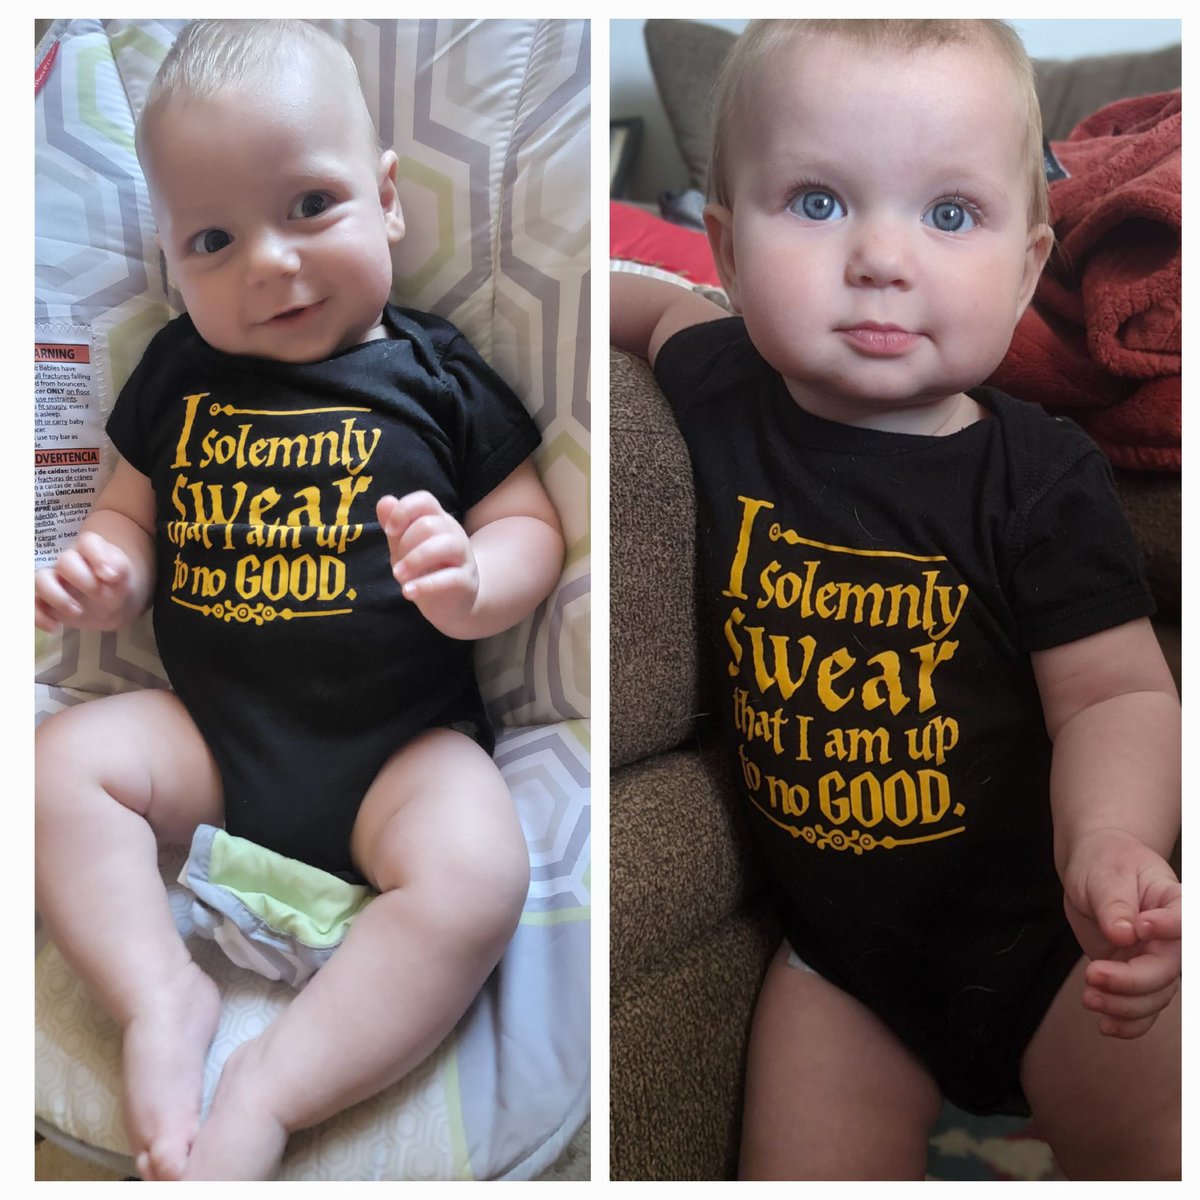 Luke on the left, 3 months old. Rory on the right 8 months old. Same onsie... I'd say Luke is going to be a BIG BOI... He's almost 4 months now and already wearing 6-9 month clothes!